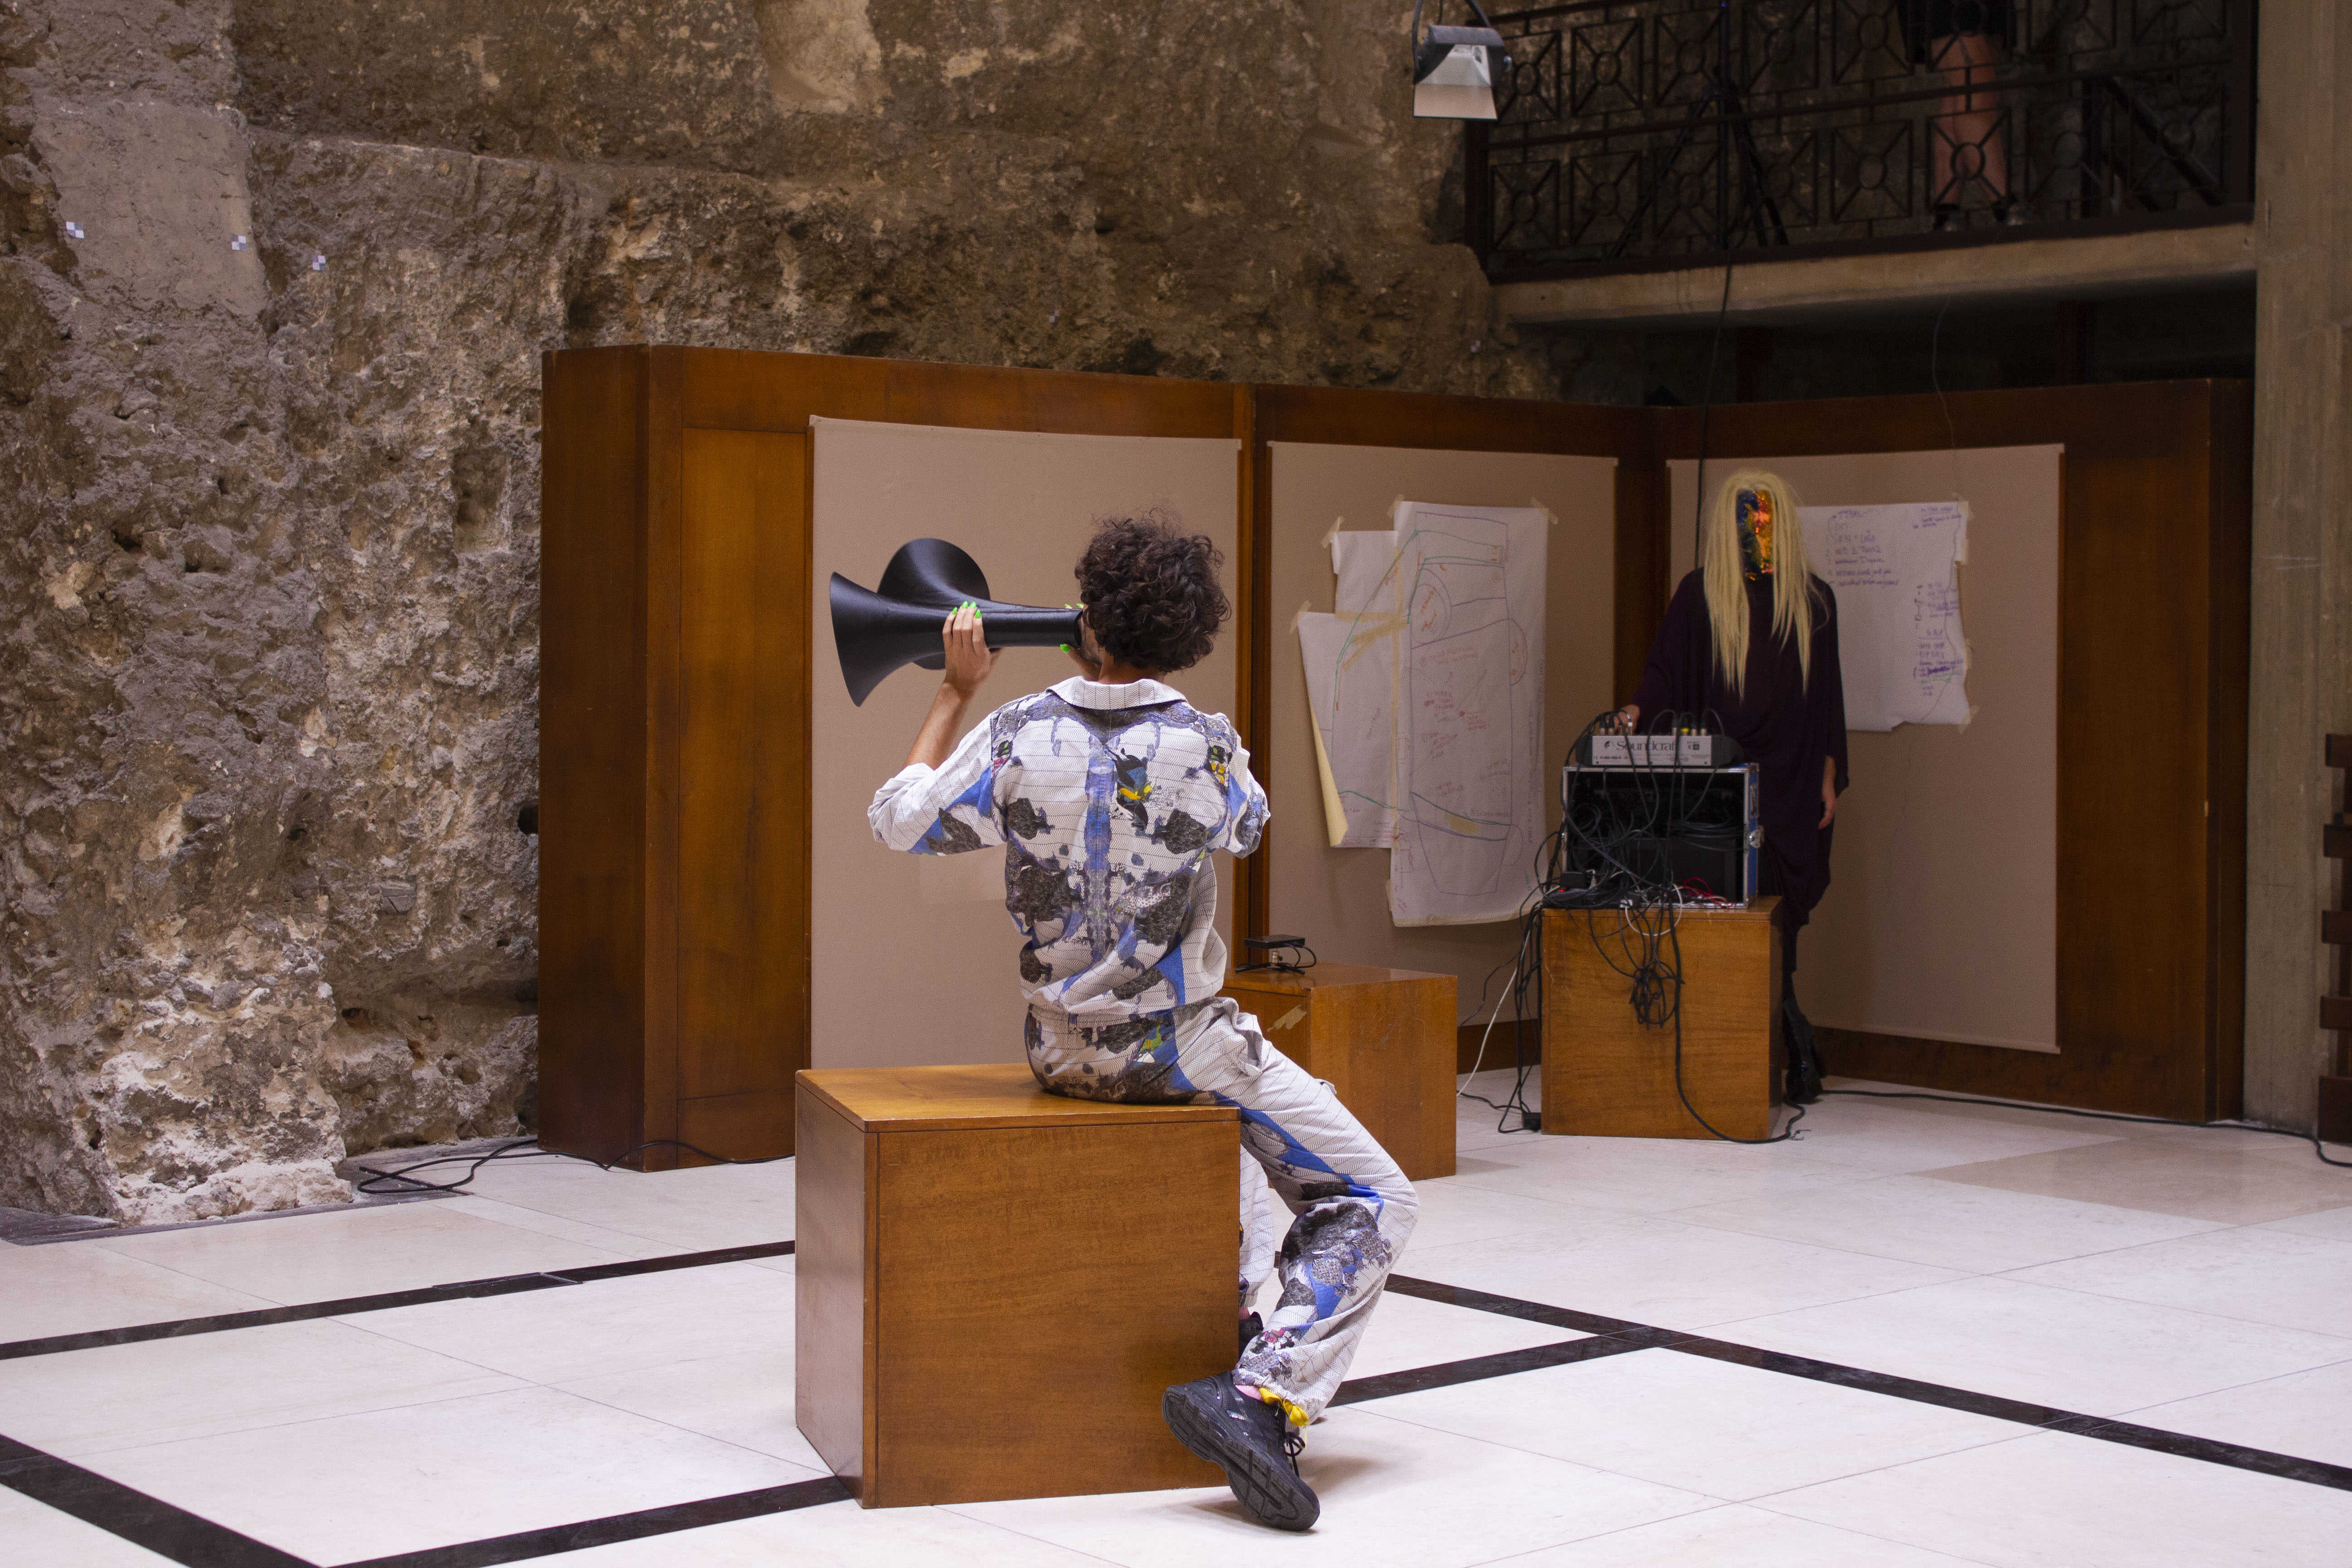 Scene from: "Untitled (Orificially Yours) , the ninth act of the COOP study group “The Immemorial Body: Betraying Carmelo Bene in 9 Acts” . Cagliari, June 29, 2019. Location: Sala Mostre Temporanee, Cittadella dei Musei. Photo: Silvia Ulloa